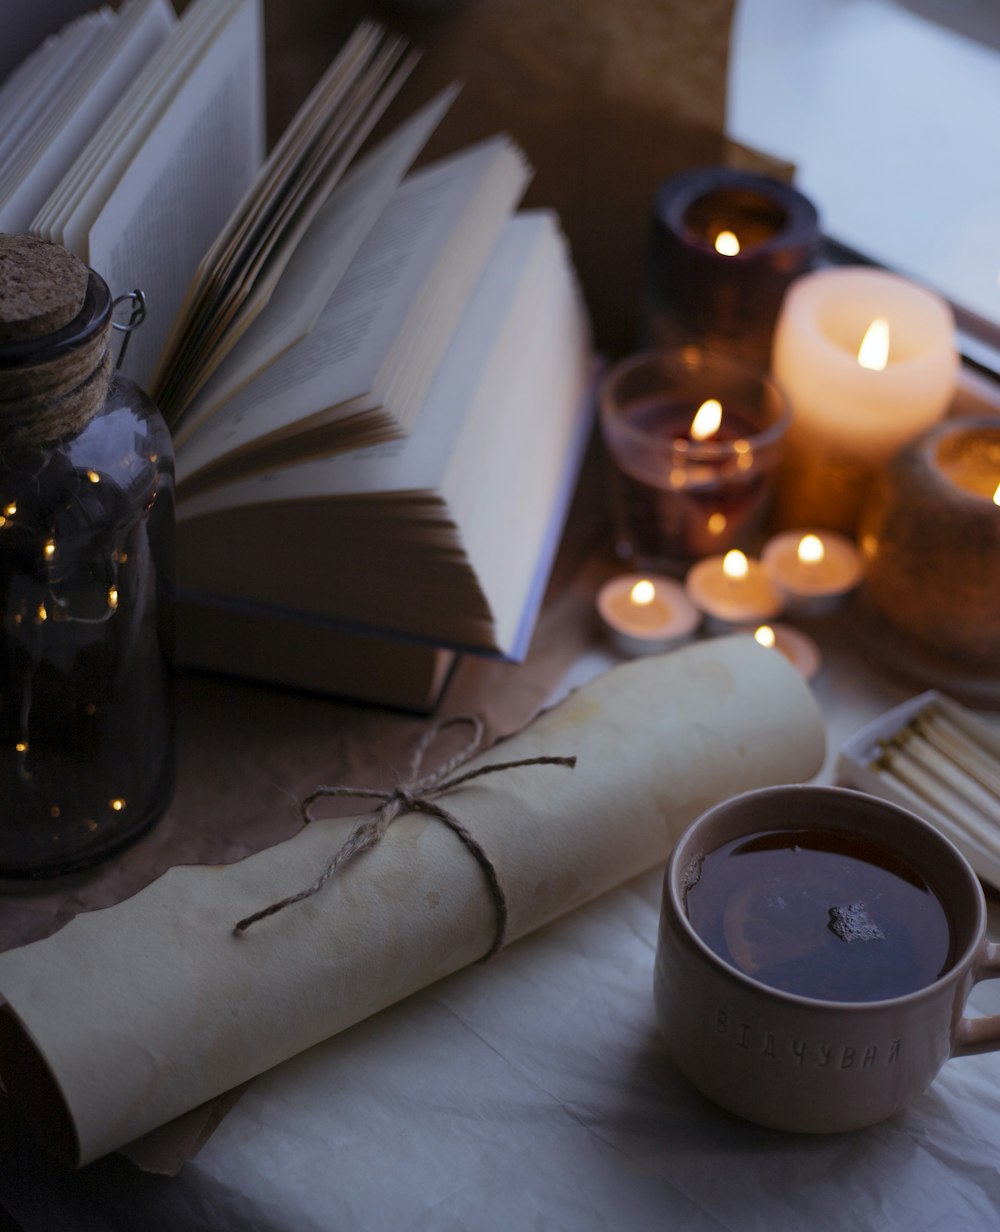 a table topped with books and candles next to a cup of coffee